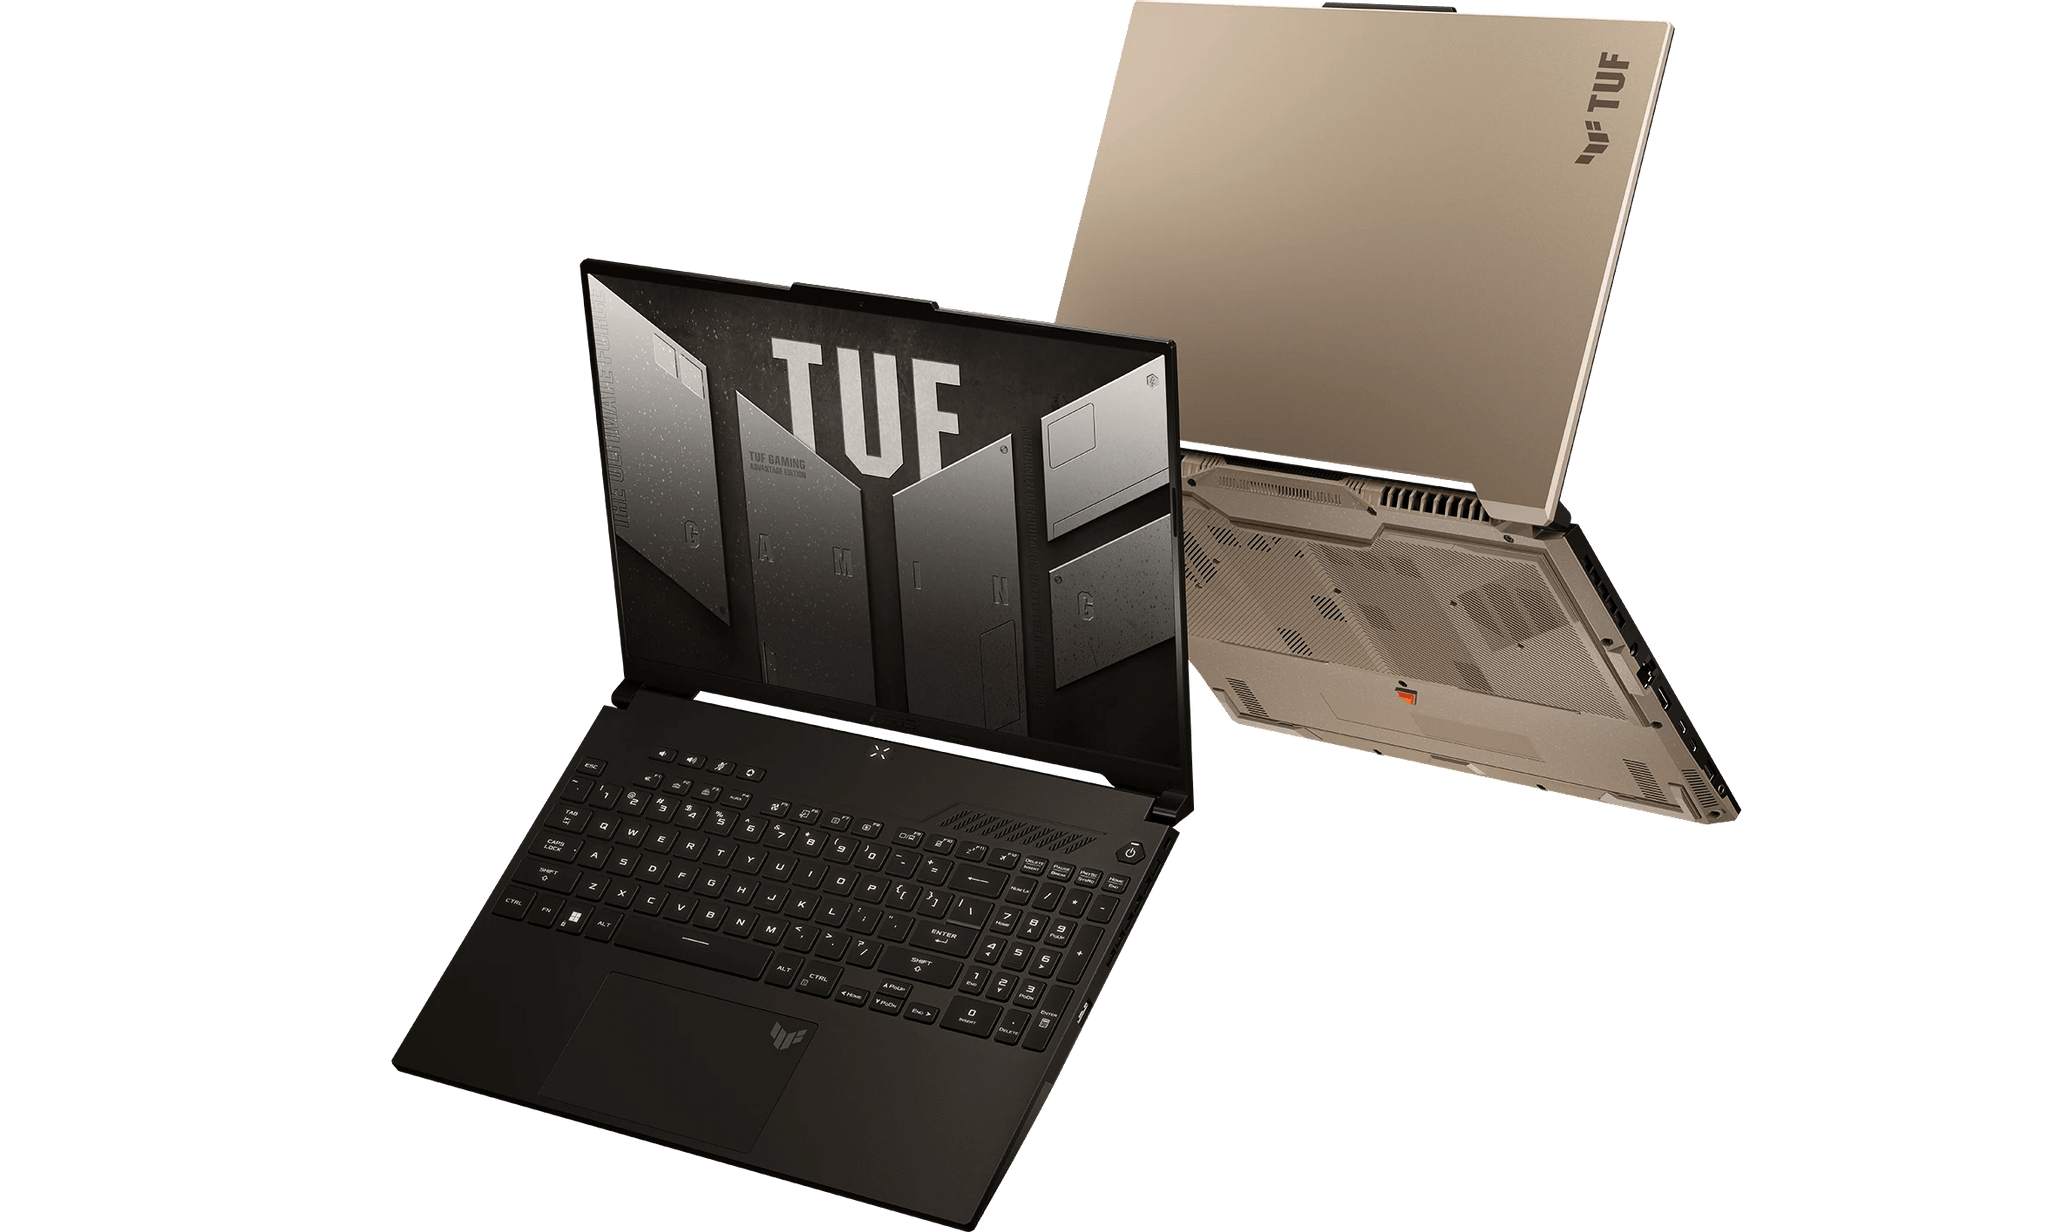 The Asus TUF A16. Source: Asus.